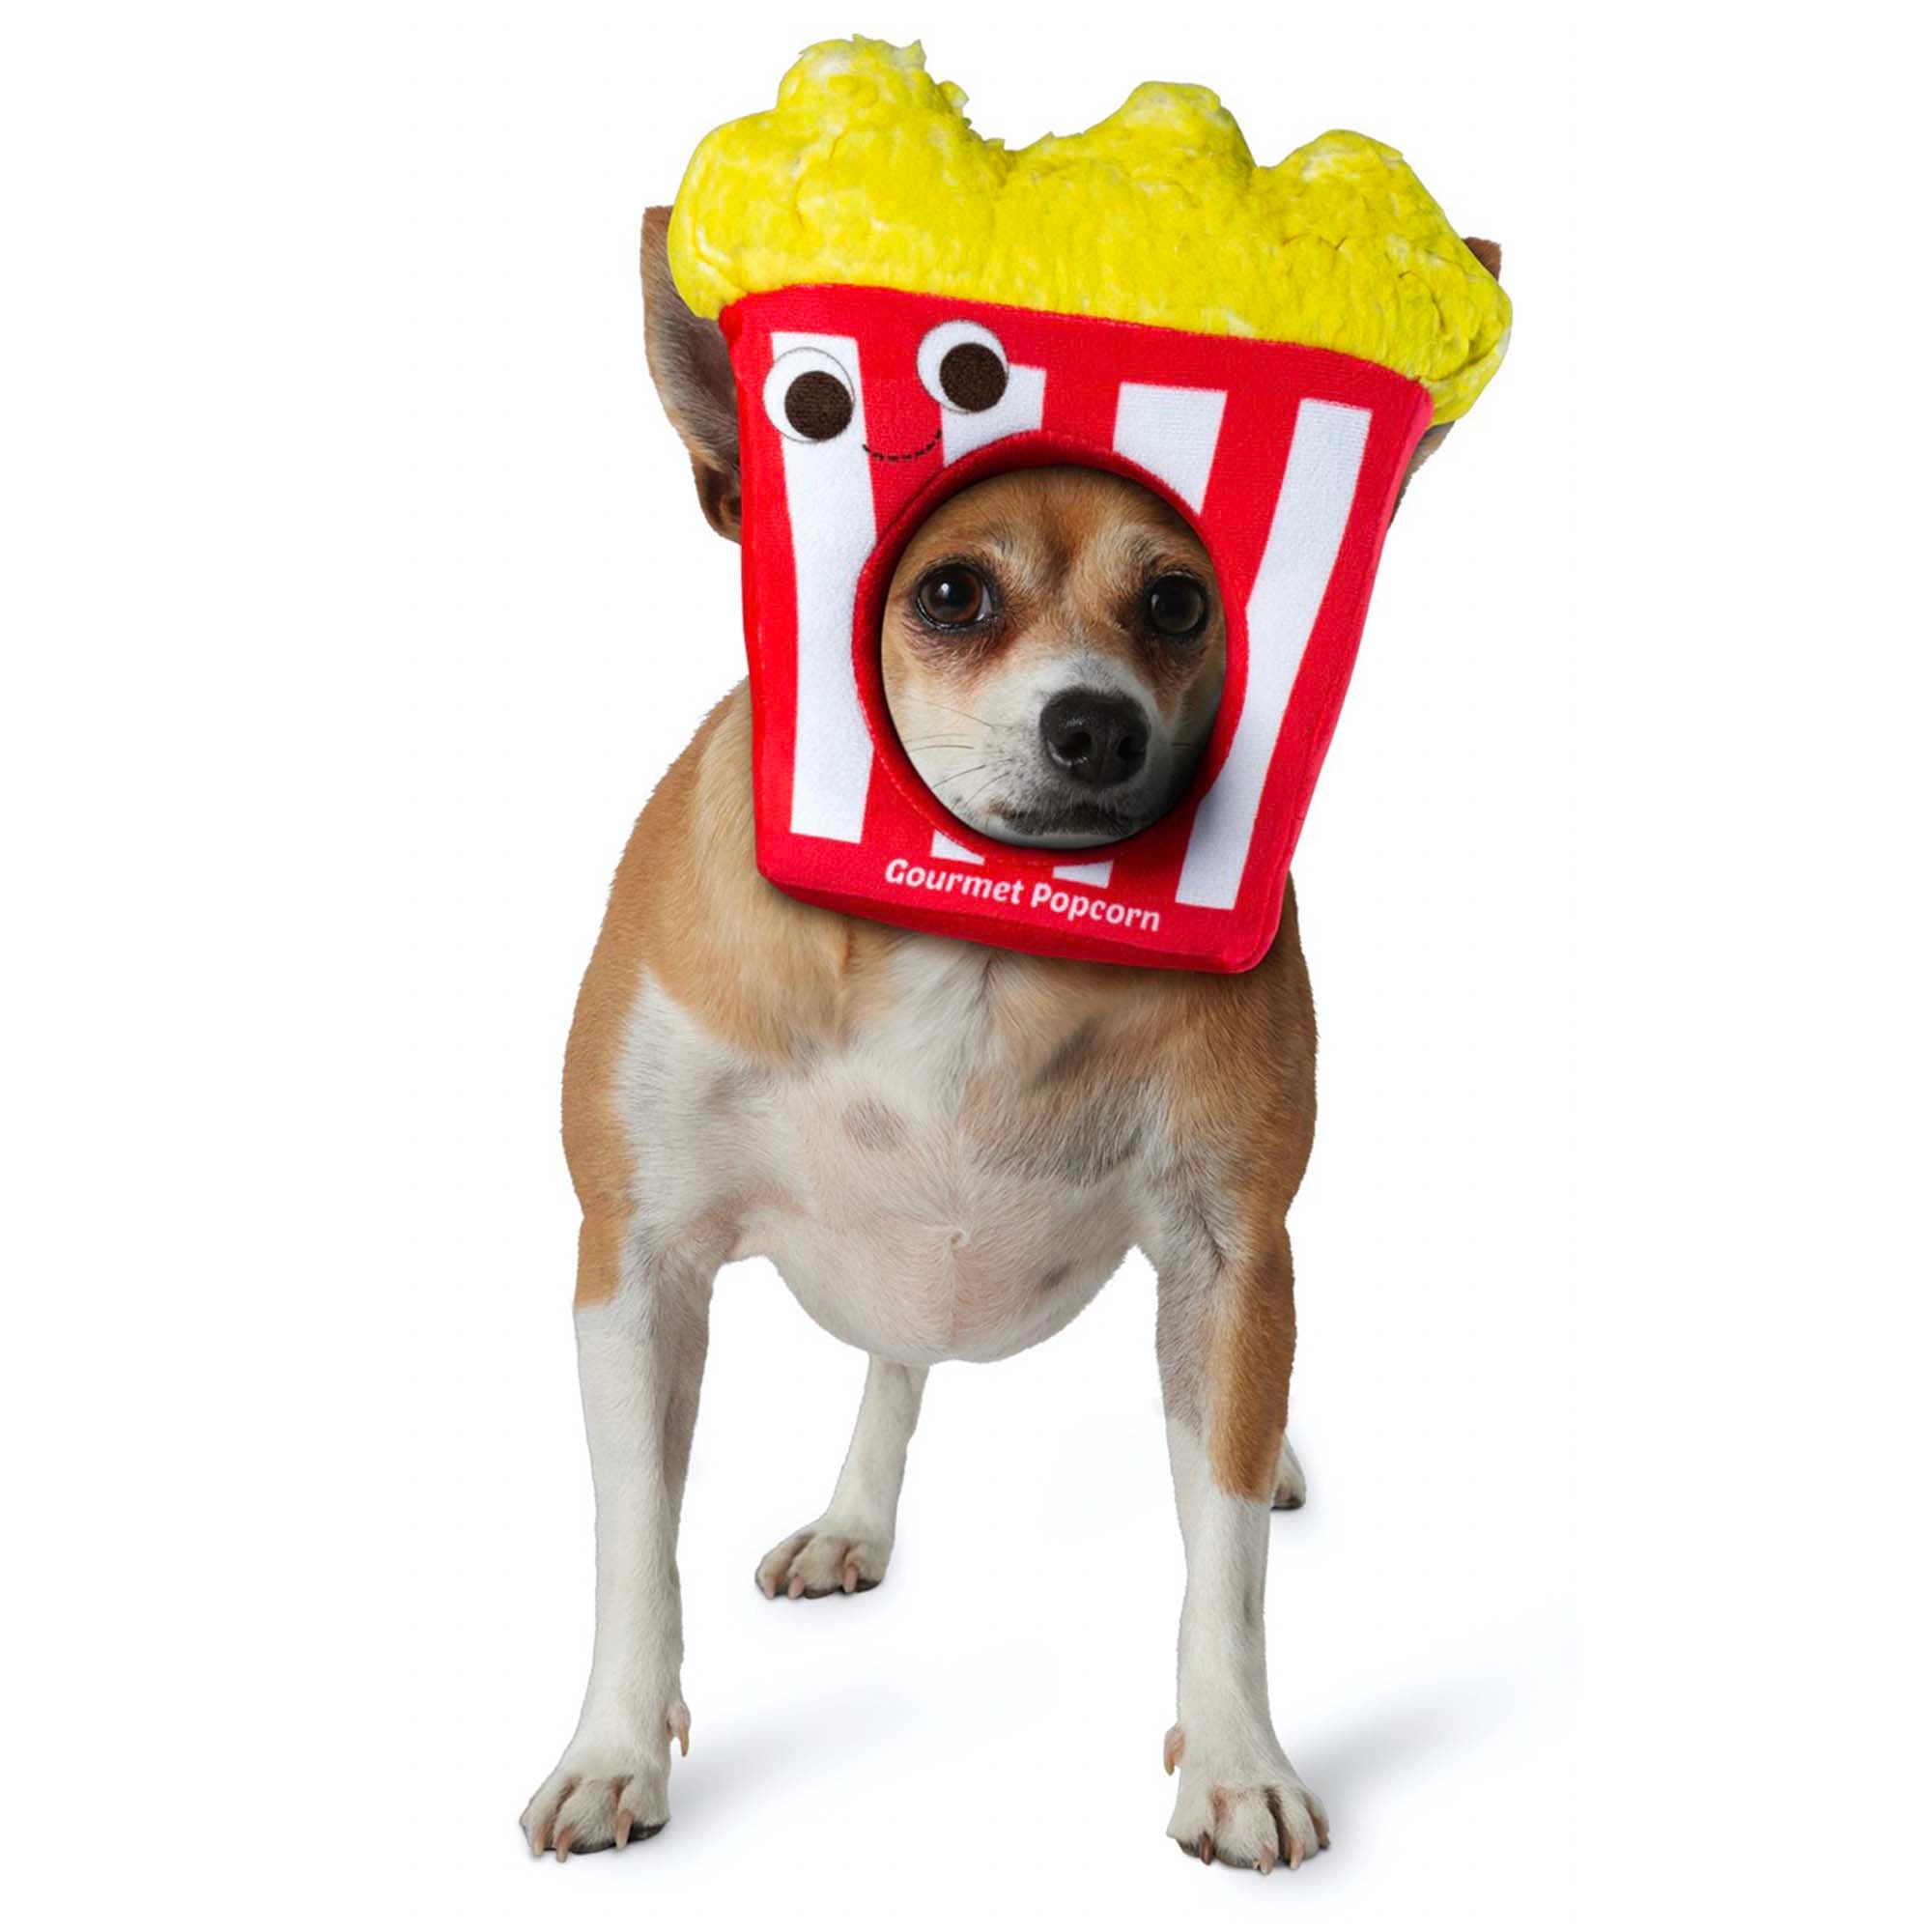 Popcorn Face Costume for Pets